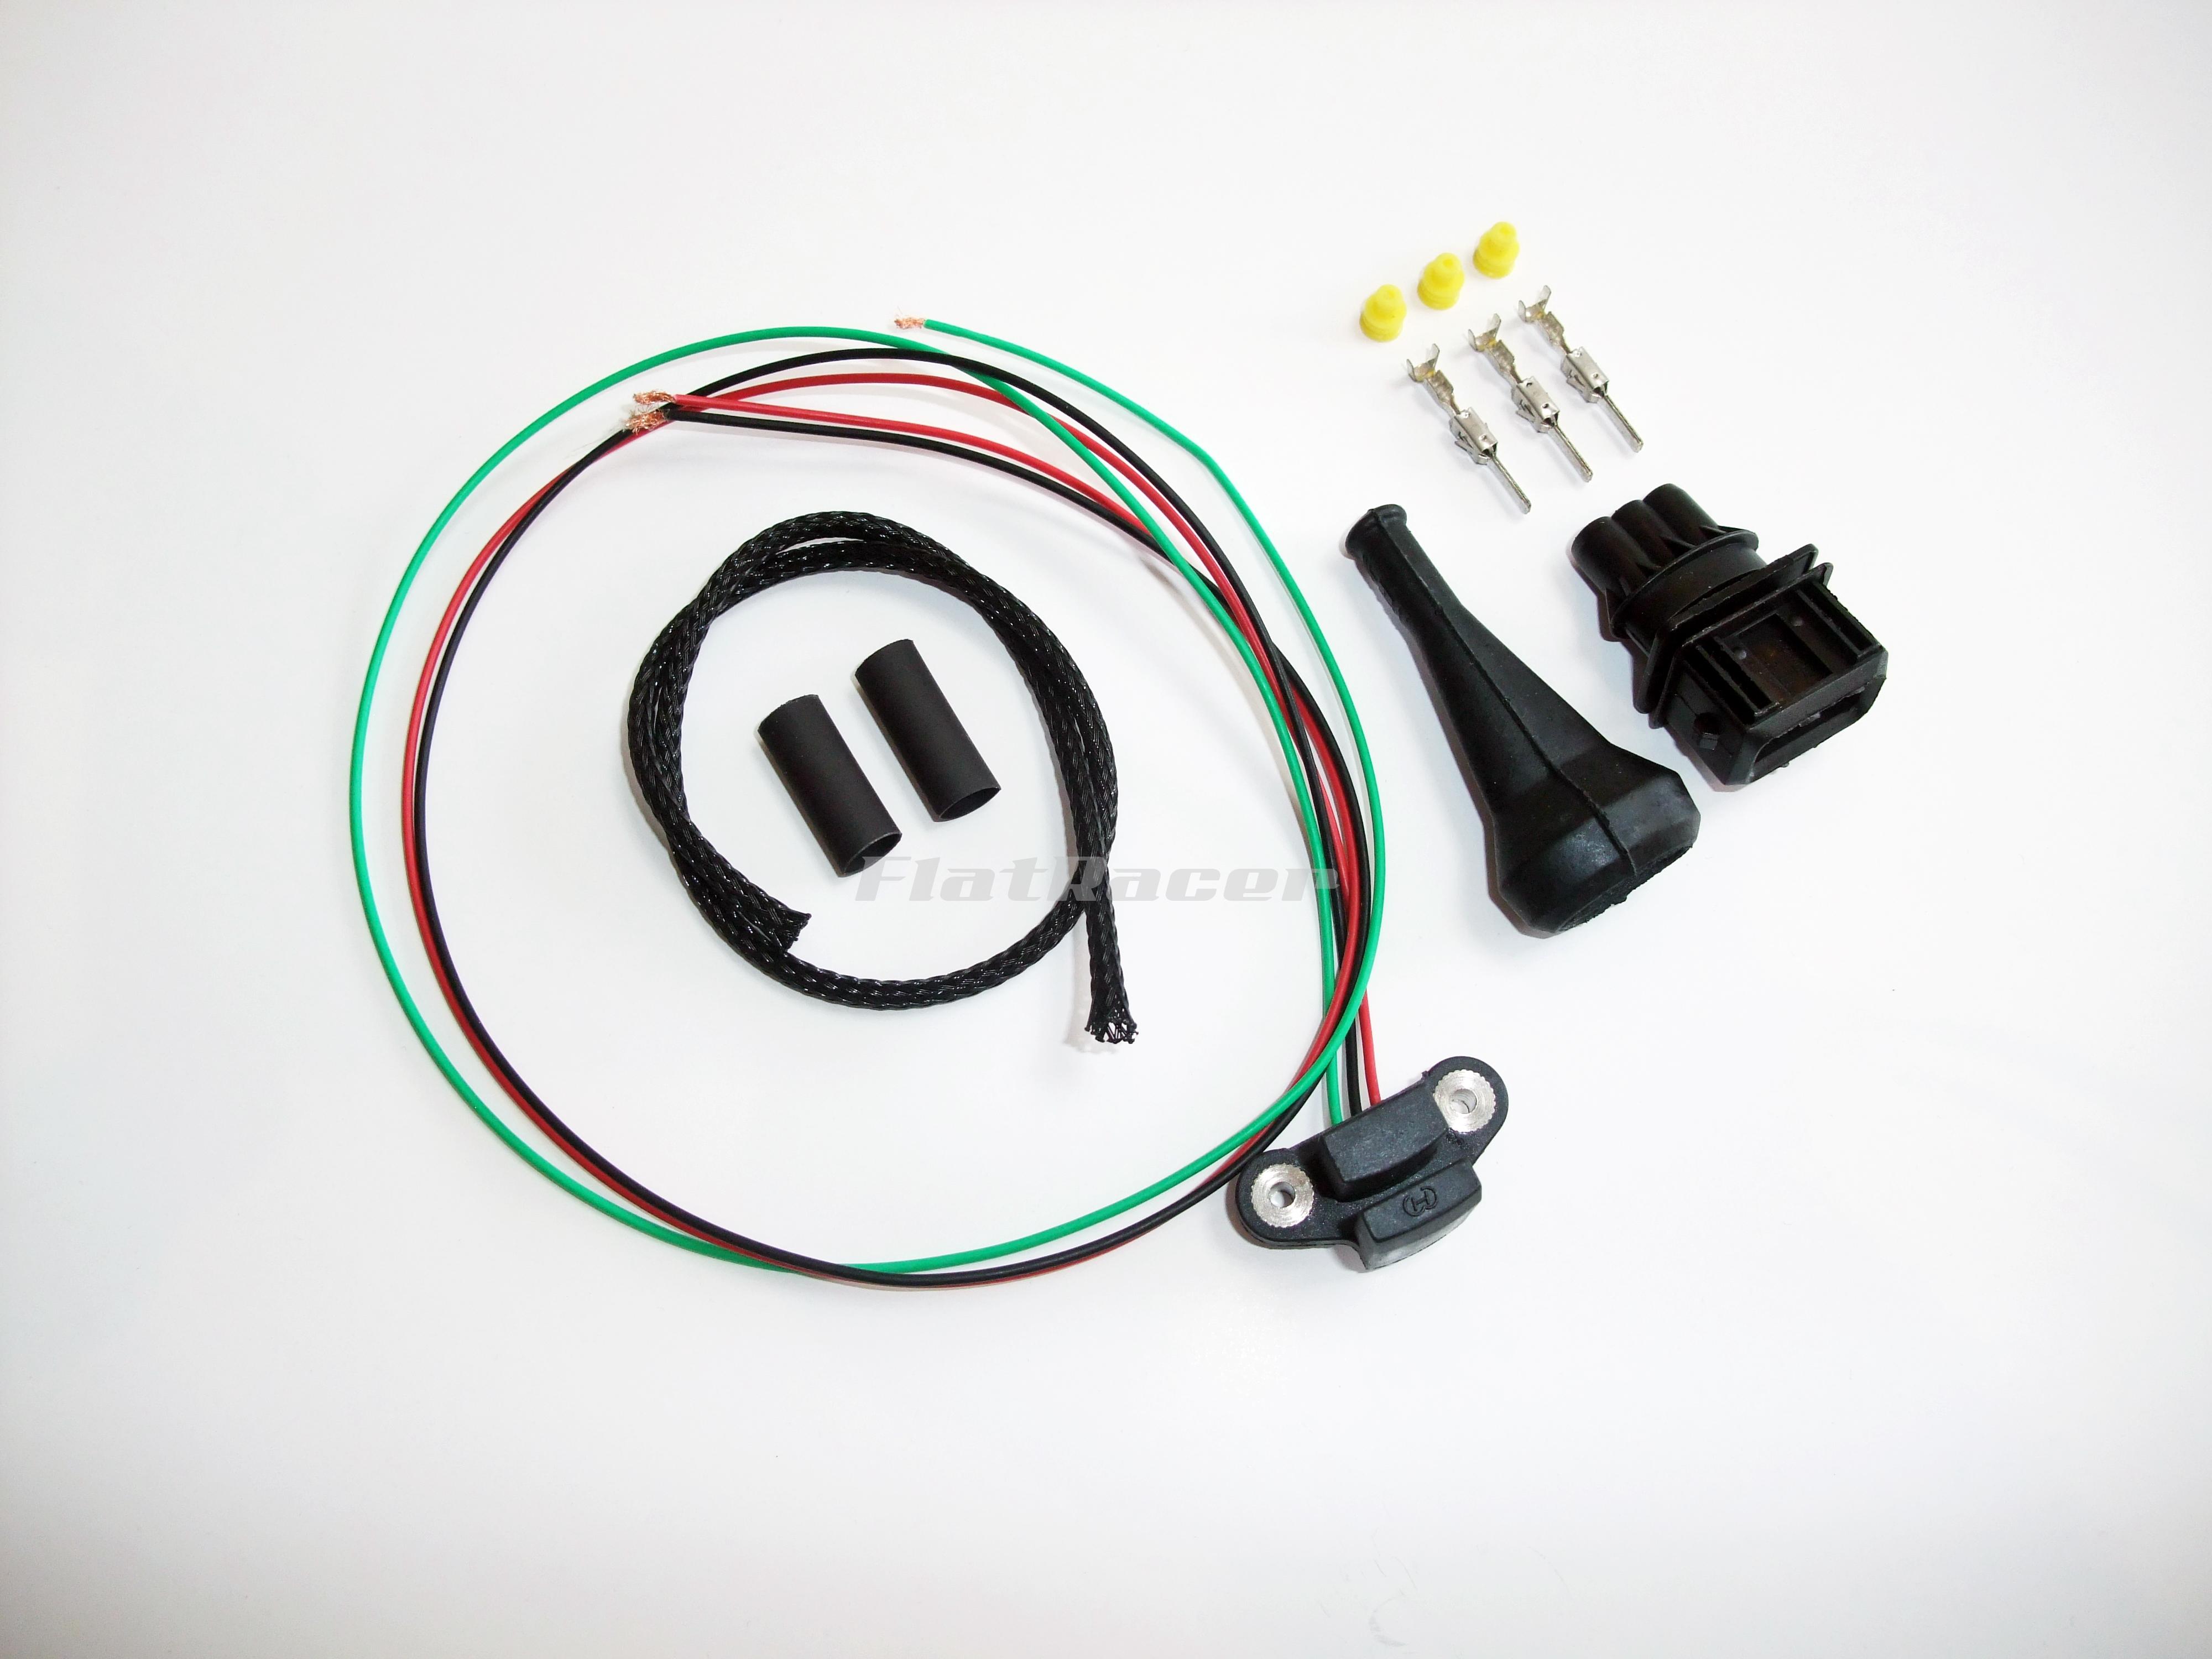 BMW Airhead Boxer post 1981 electronic ignition Hall sender REPAIR kit